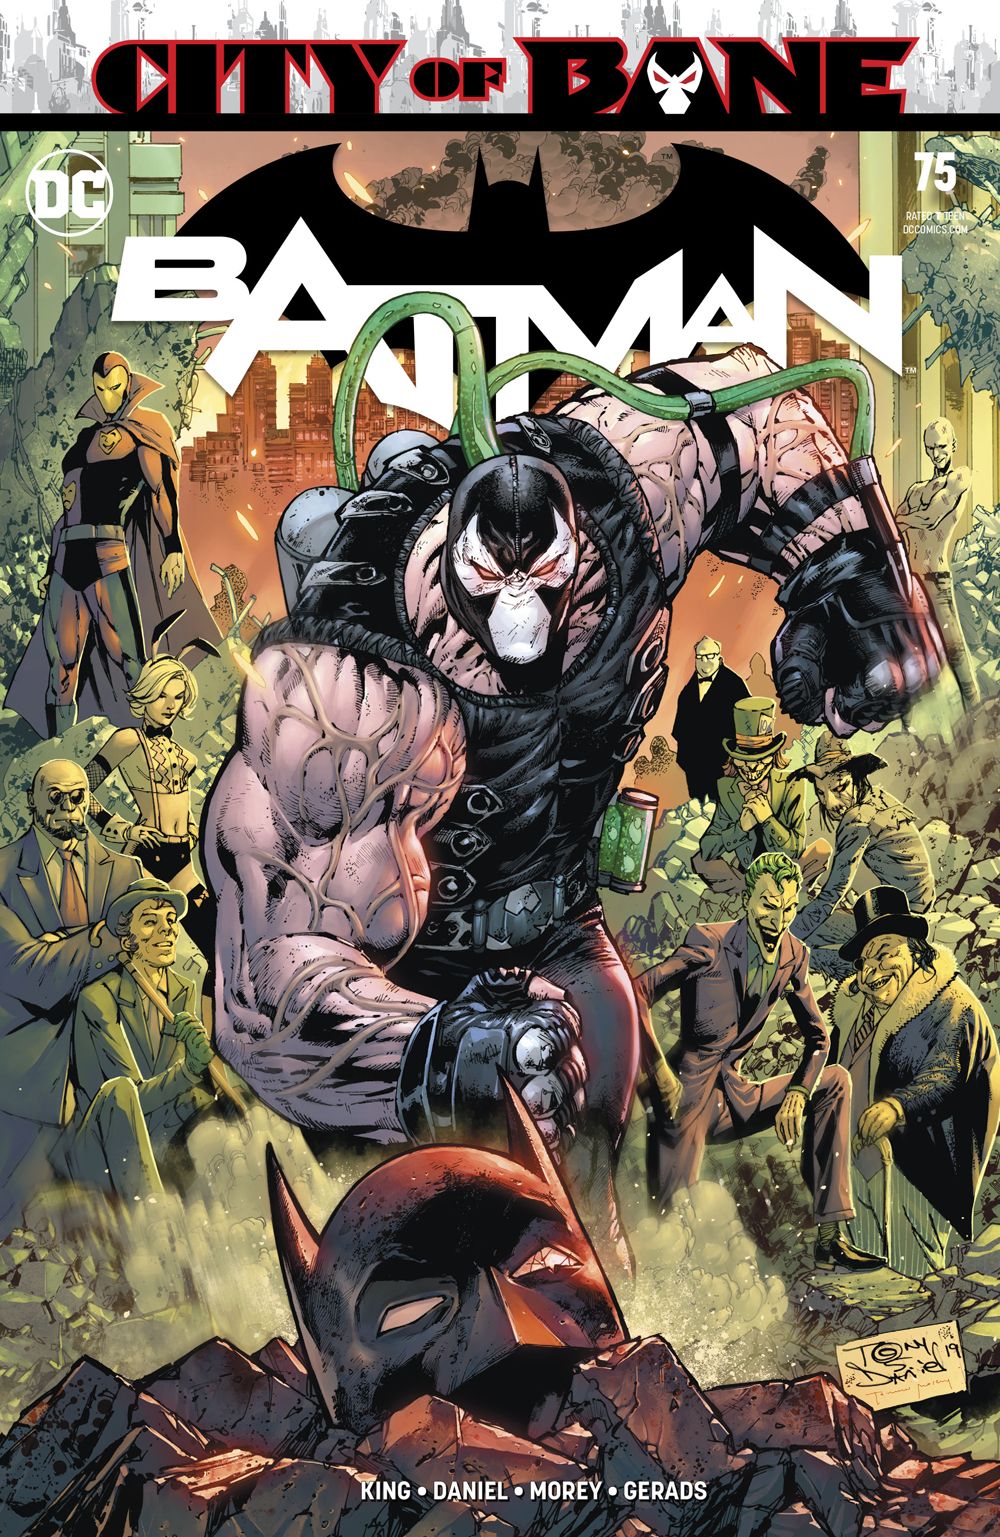 REVIEW: Batman marks the start of new arc, CITY OF BANE